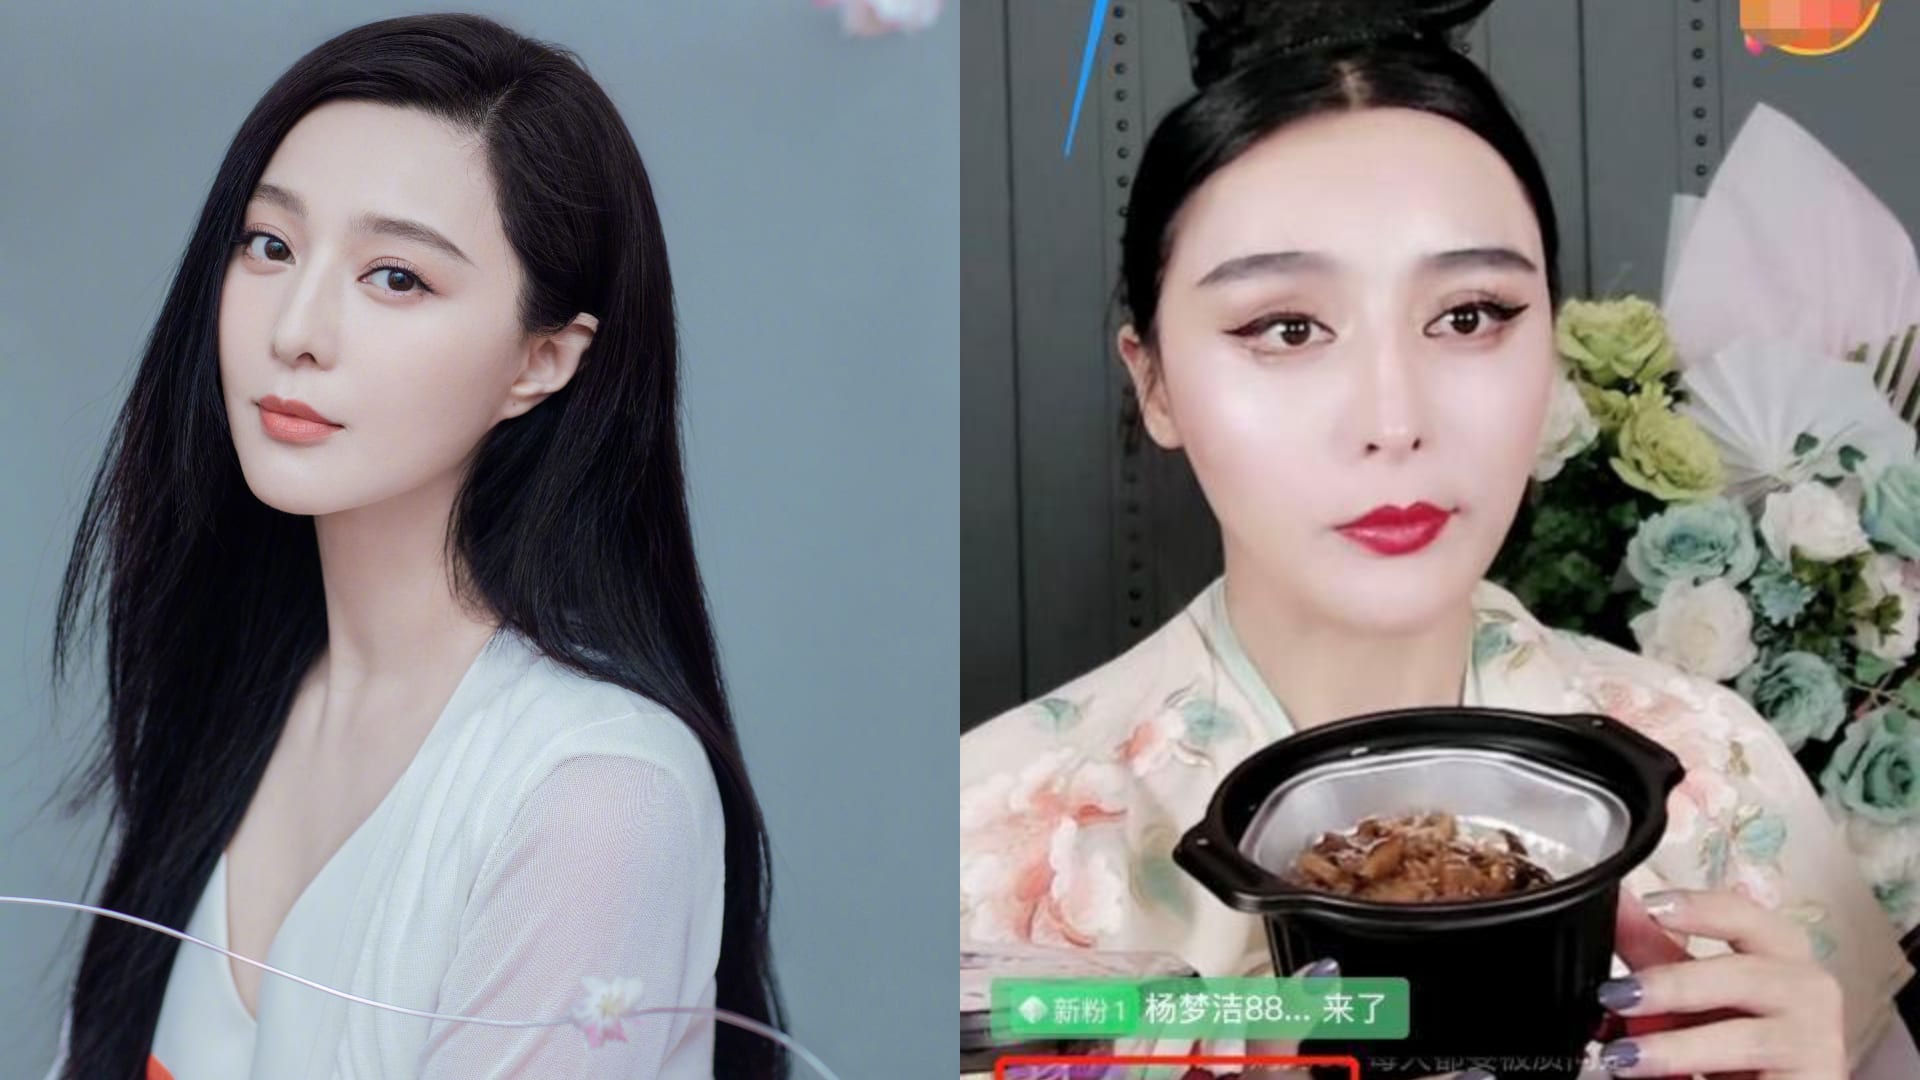 This Fan Bingbing Impersonator Can Reportedly Sell Over S$20,000 Worth Of Products A Day Through Live Stream Auctions